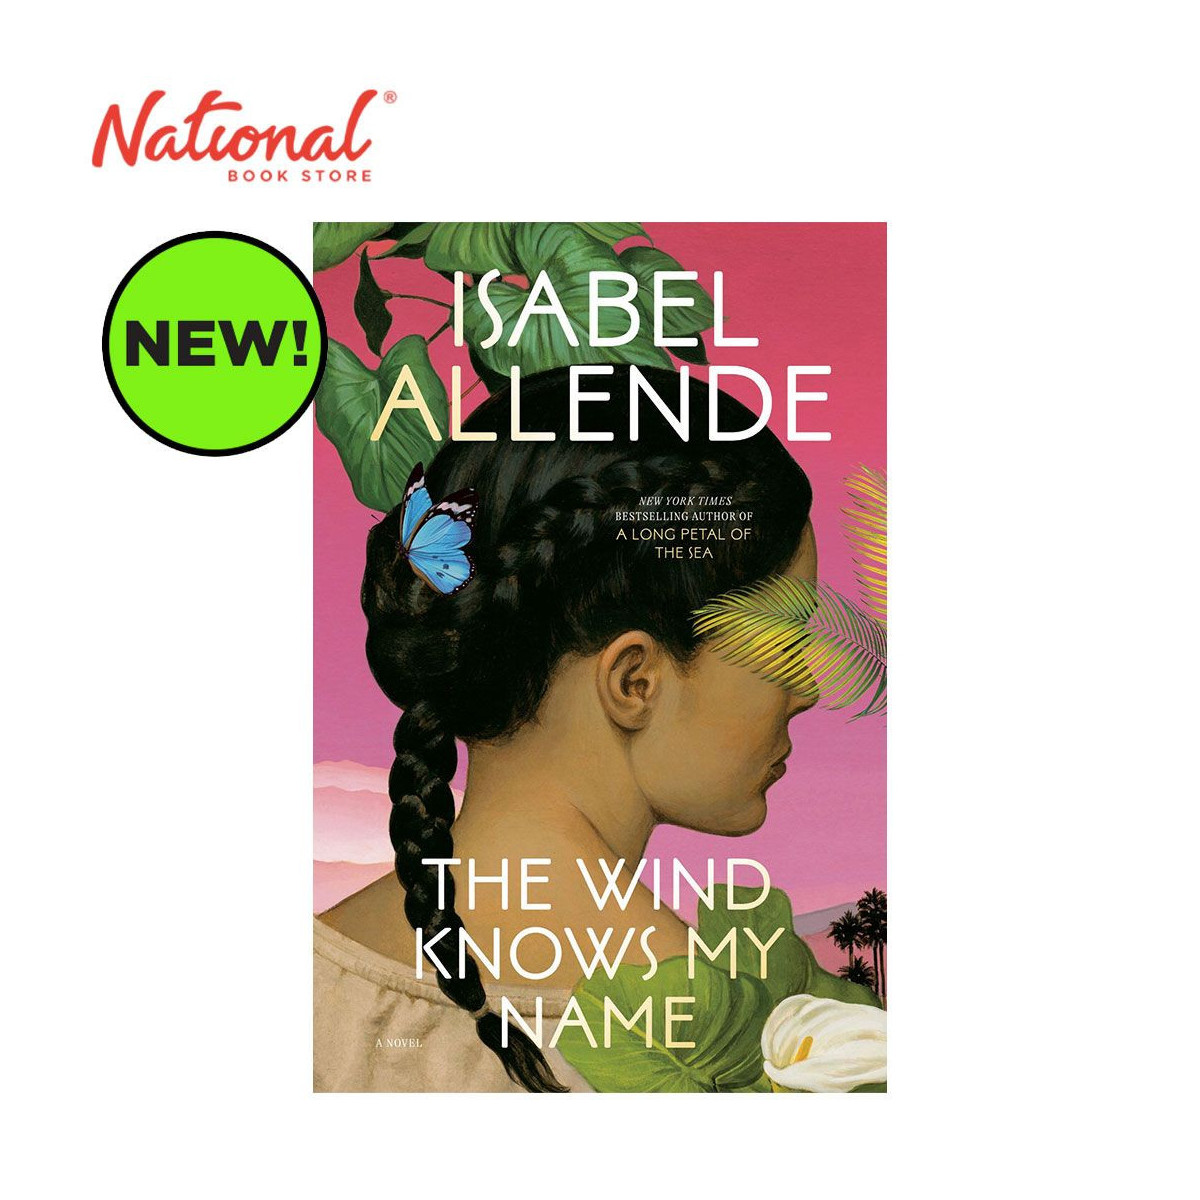 The Wind Knows My Name: A Novel by Isabel Allende - Contemporary Fiction